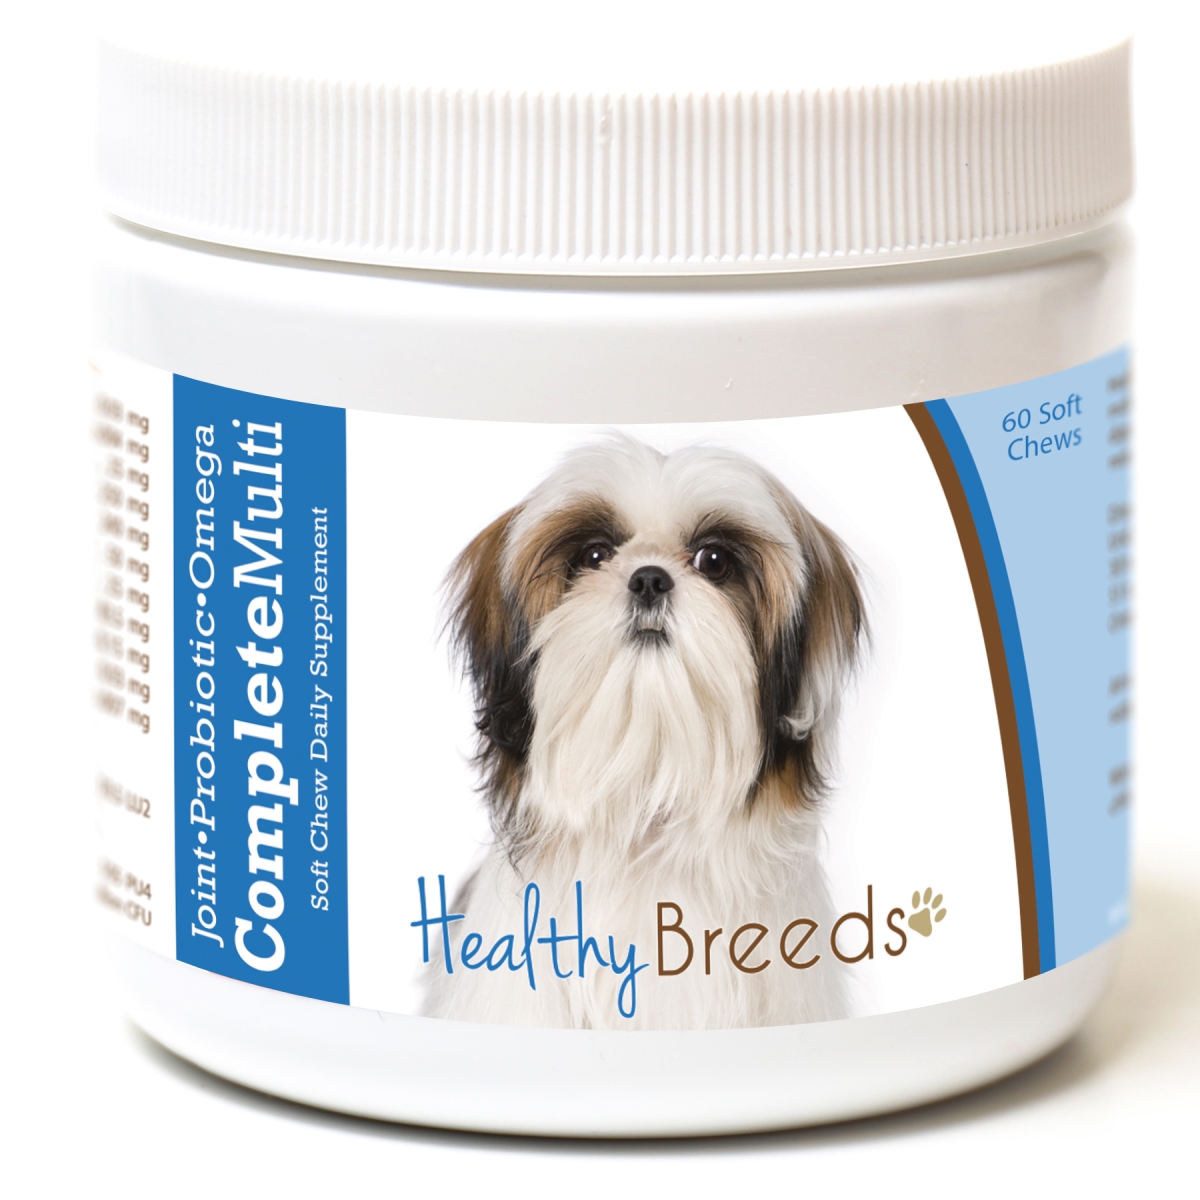 Picture of Healthy Breeds 192959009125 Shih Tzu all in one Multivitamin Soft Chew - 60 Count